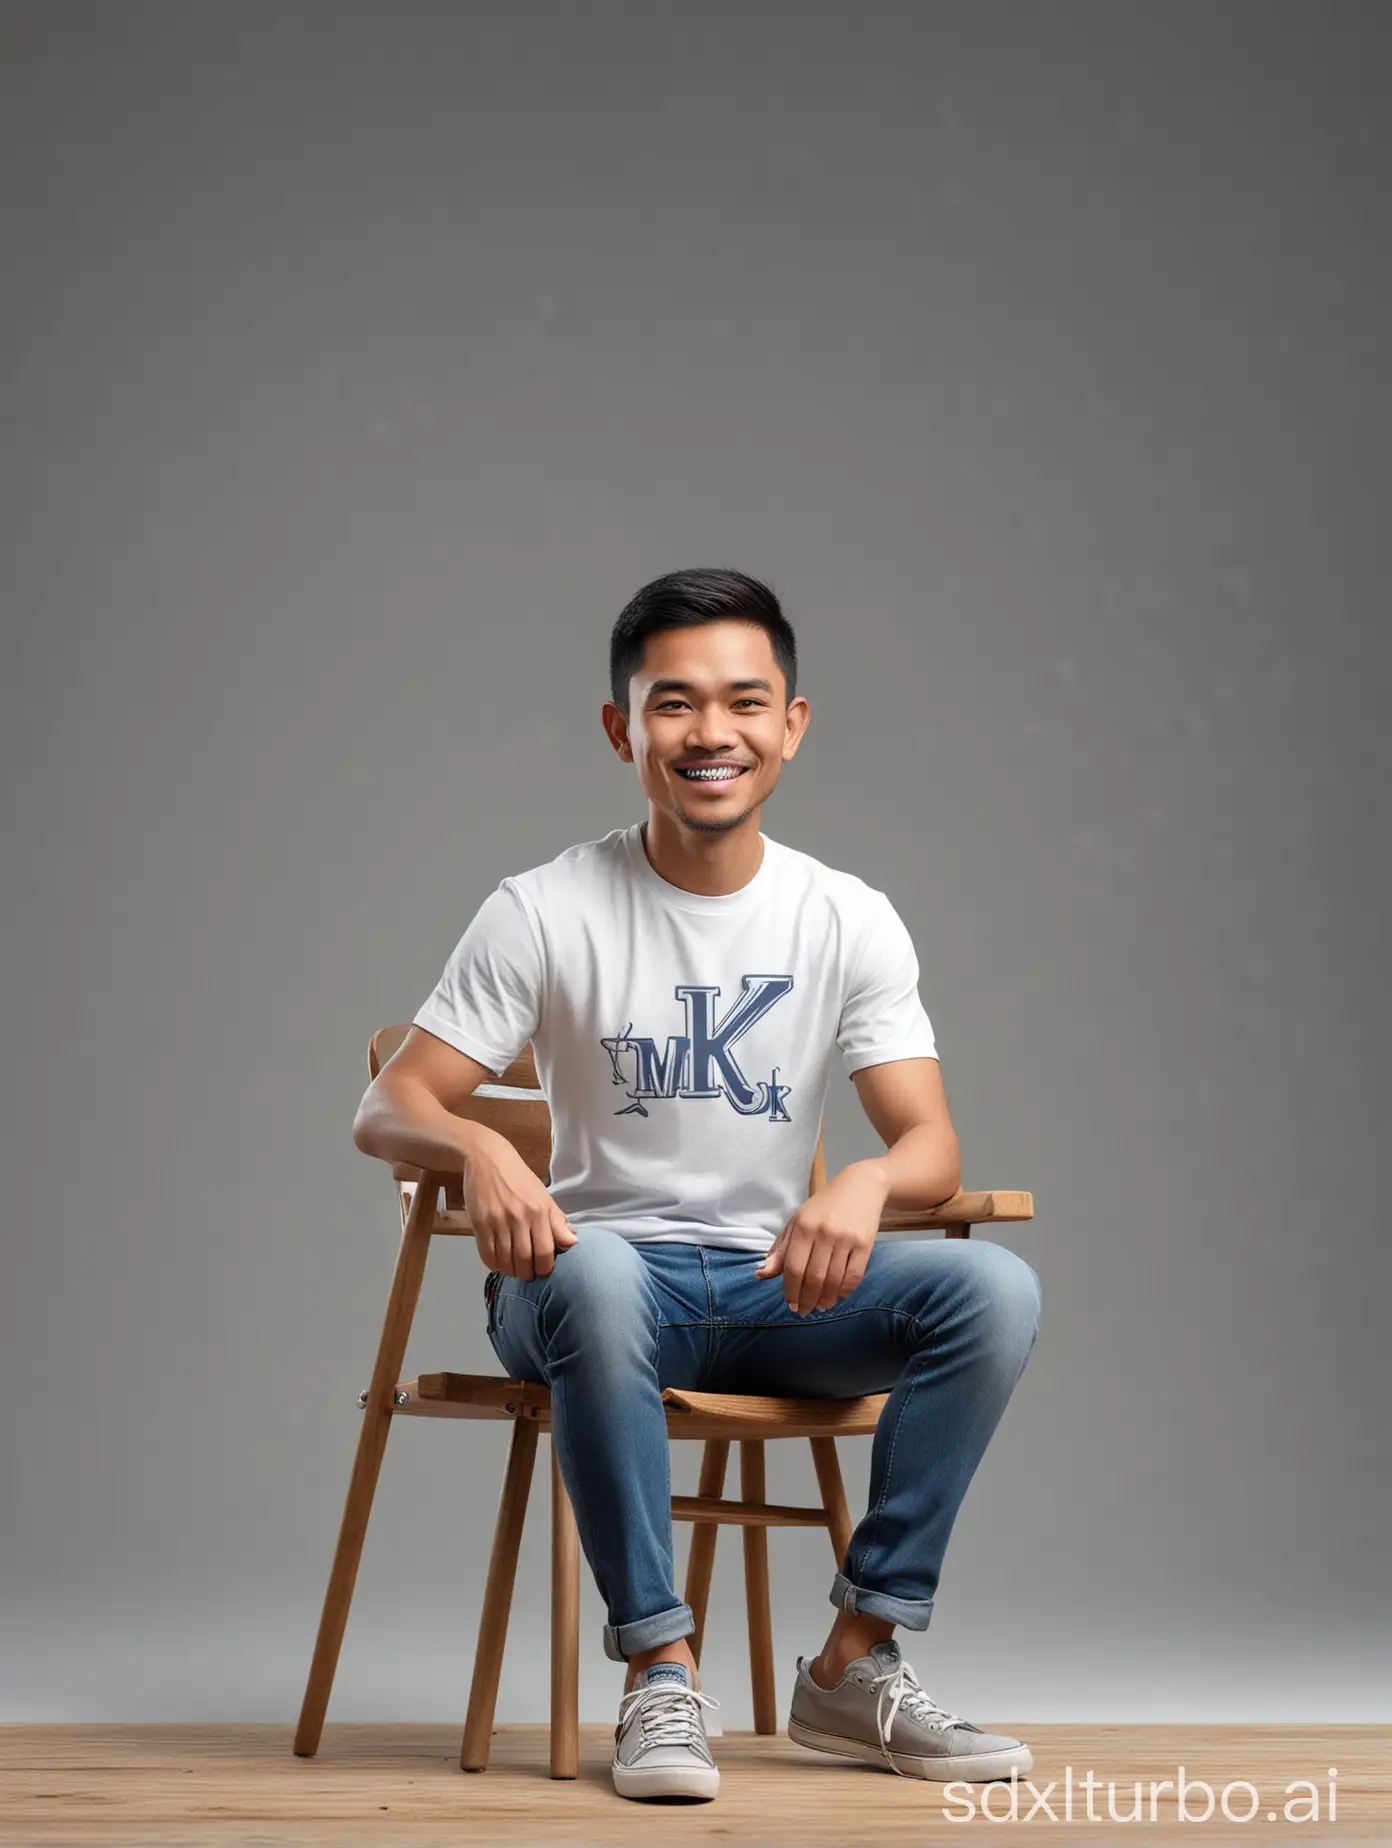 Realistic 4D caricature of an Indonesian man aged 30yo, short hair, wearing a simple shirt with letter 'MK studio', blue jeans, sneaker shoes, sitting on a wood chair with his right hand holding a steaming cup, grey gradient background